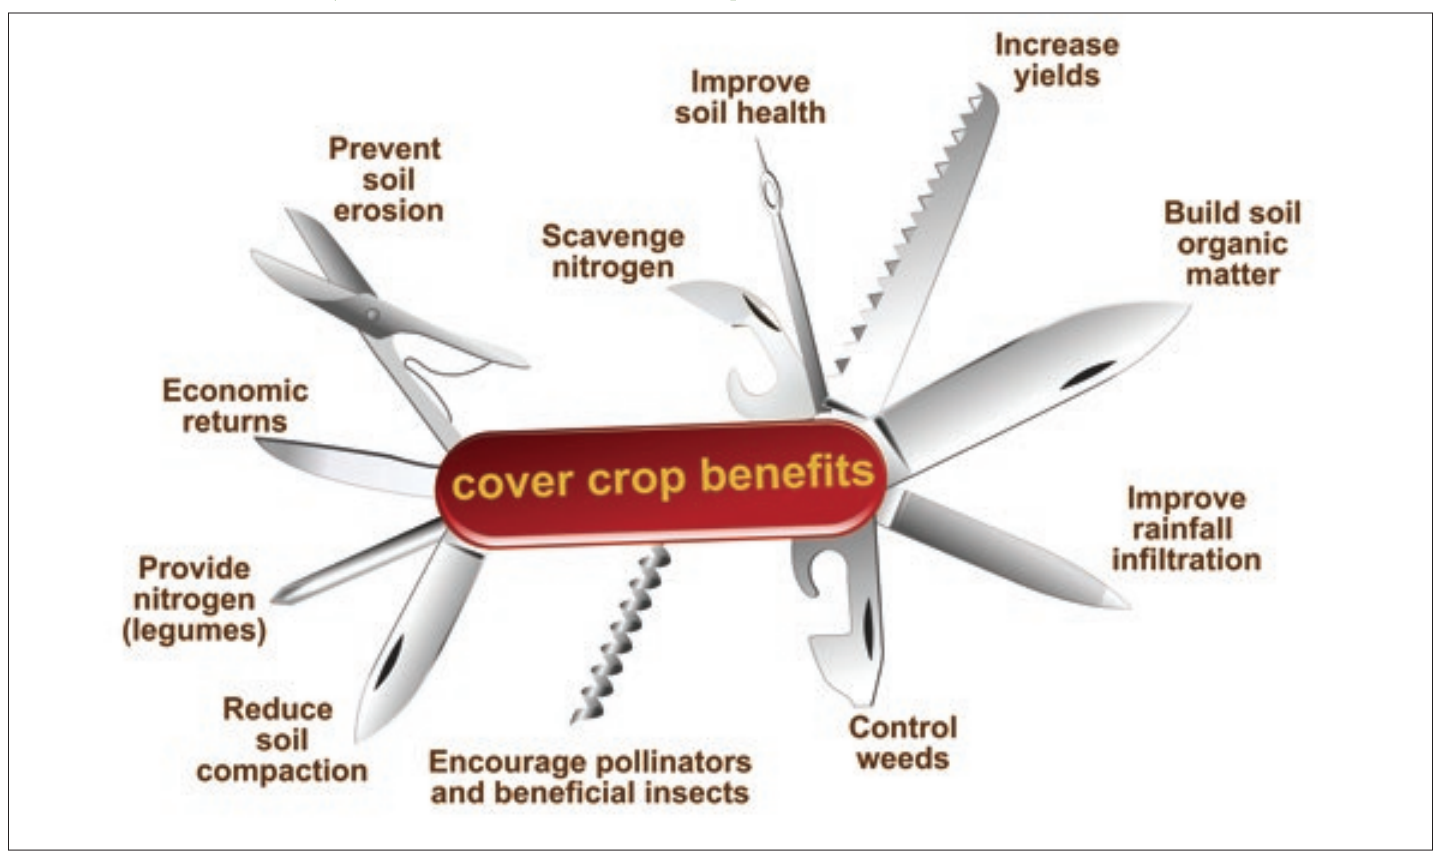 This graphic shows the many benefits that cover crops provide over time, which include the ability to better cope with weather extremes (such as improving rainfall infiltration) and slowing climate change (such as building soil organic matter). This graphic originally appeared in Cover Crop Economics, a SARE bulletin published in 2019, and was illustrated by Carlyn Iverson.